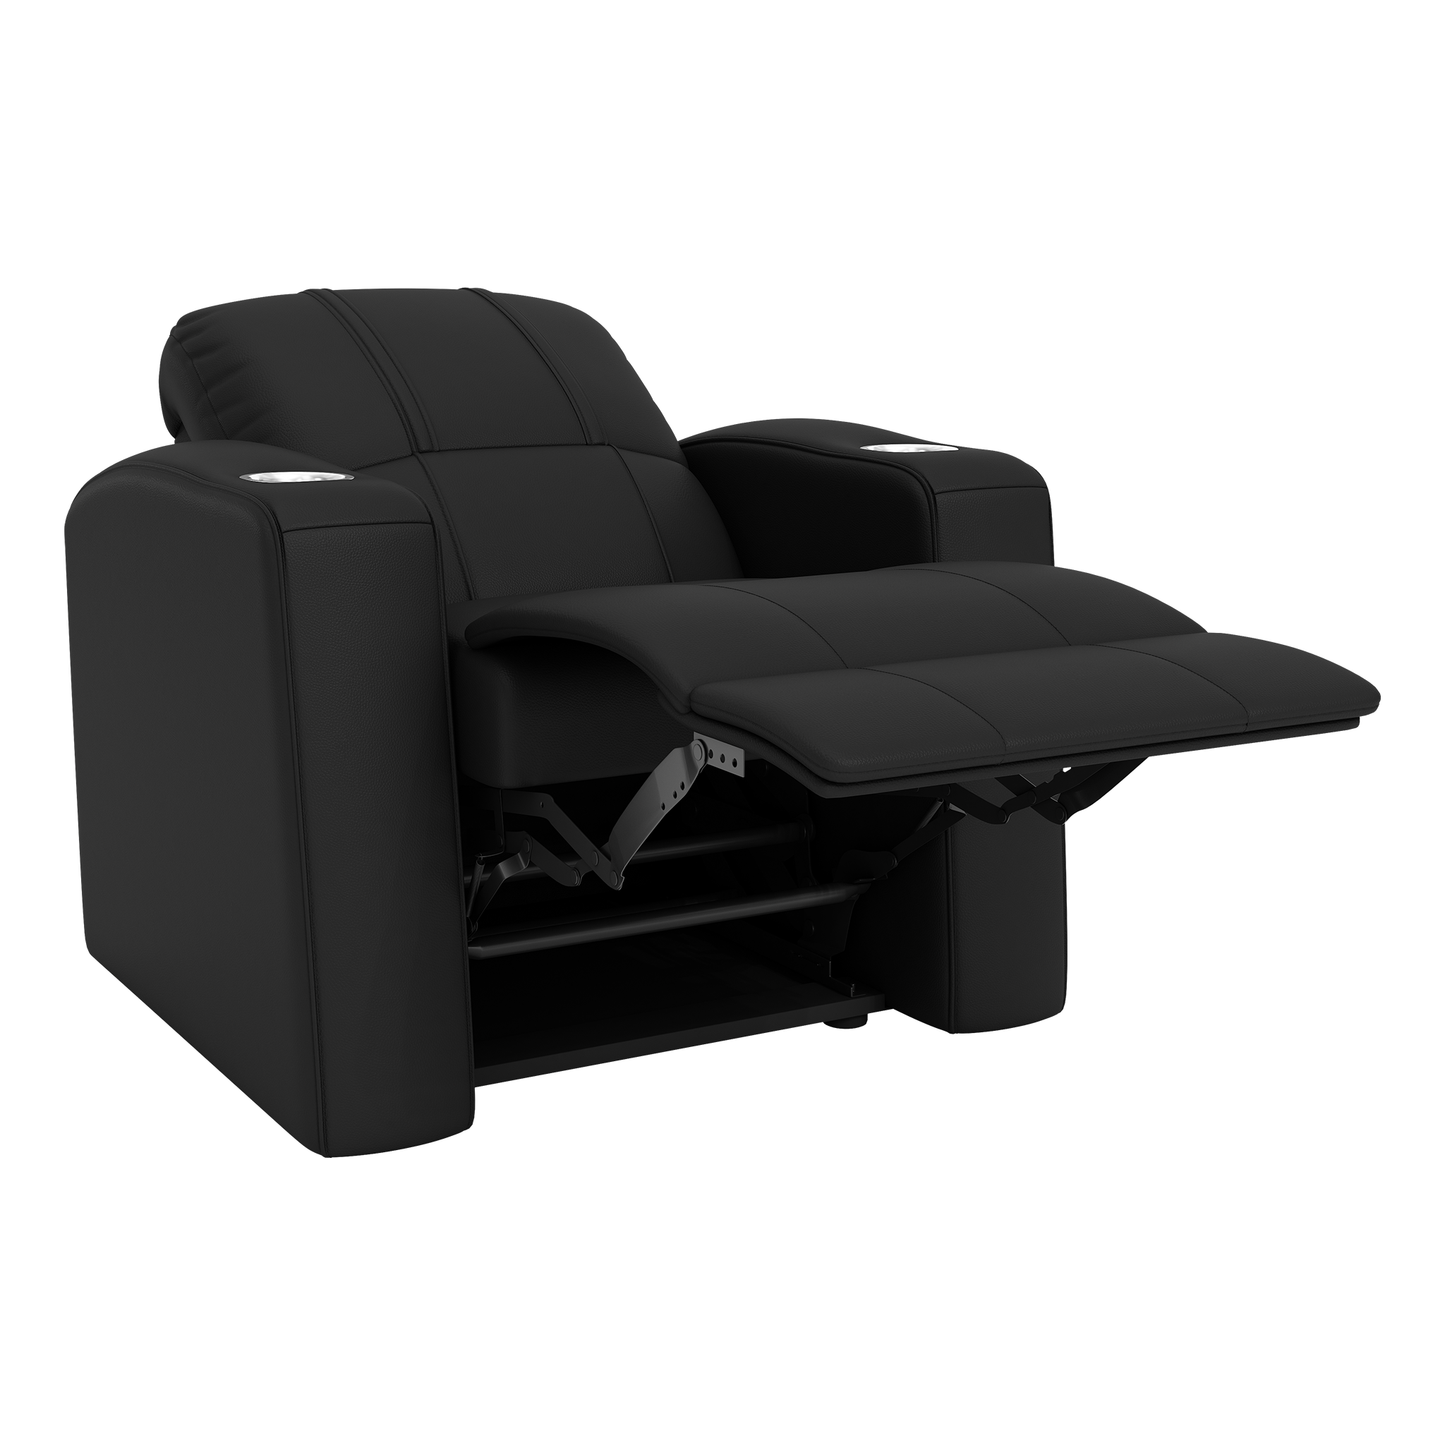 Relax Home Theater Recliner with Chihuahua Logo Panel